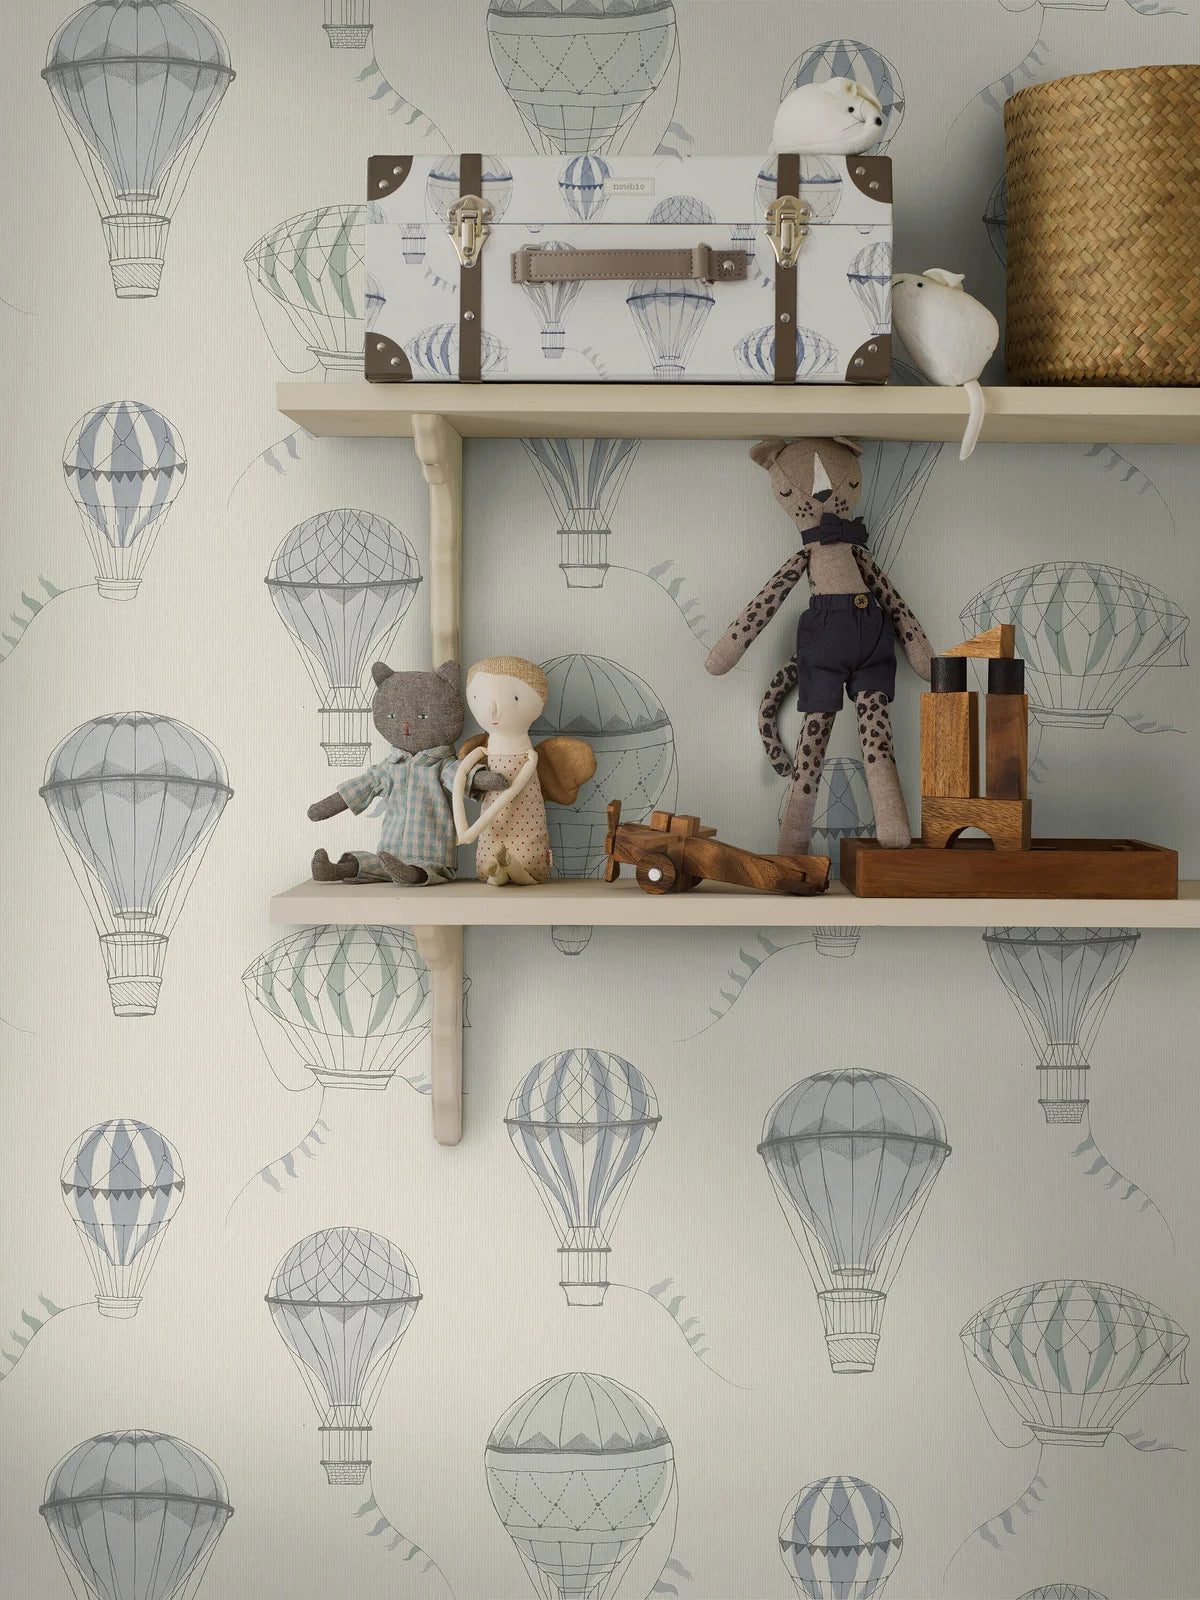 Join your little explorer on a journey high into the clouds with our "Up in the Sky" children’s wallpaper.